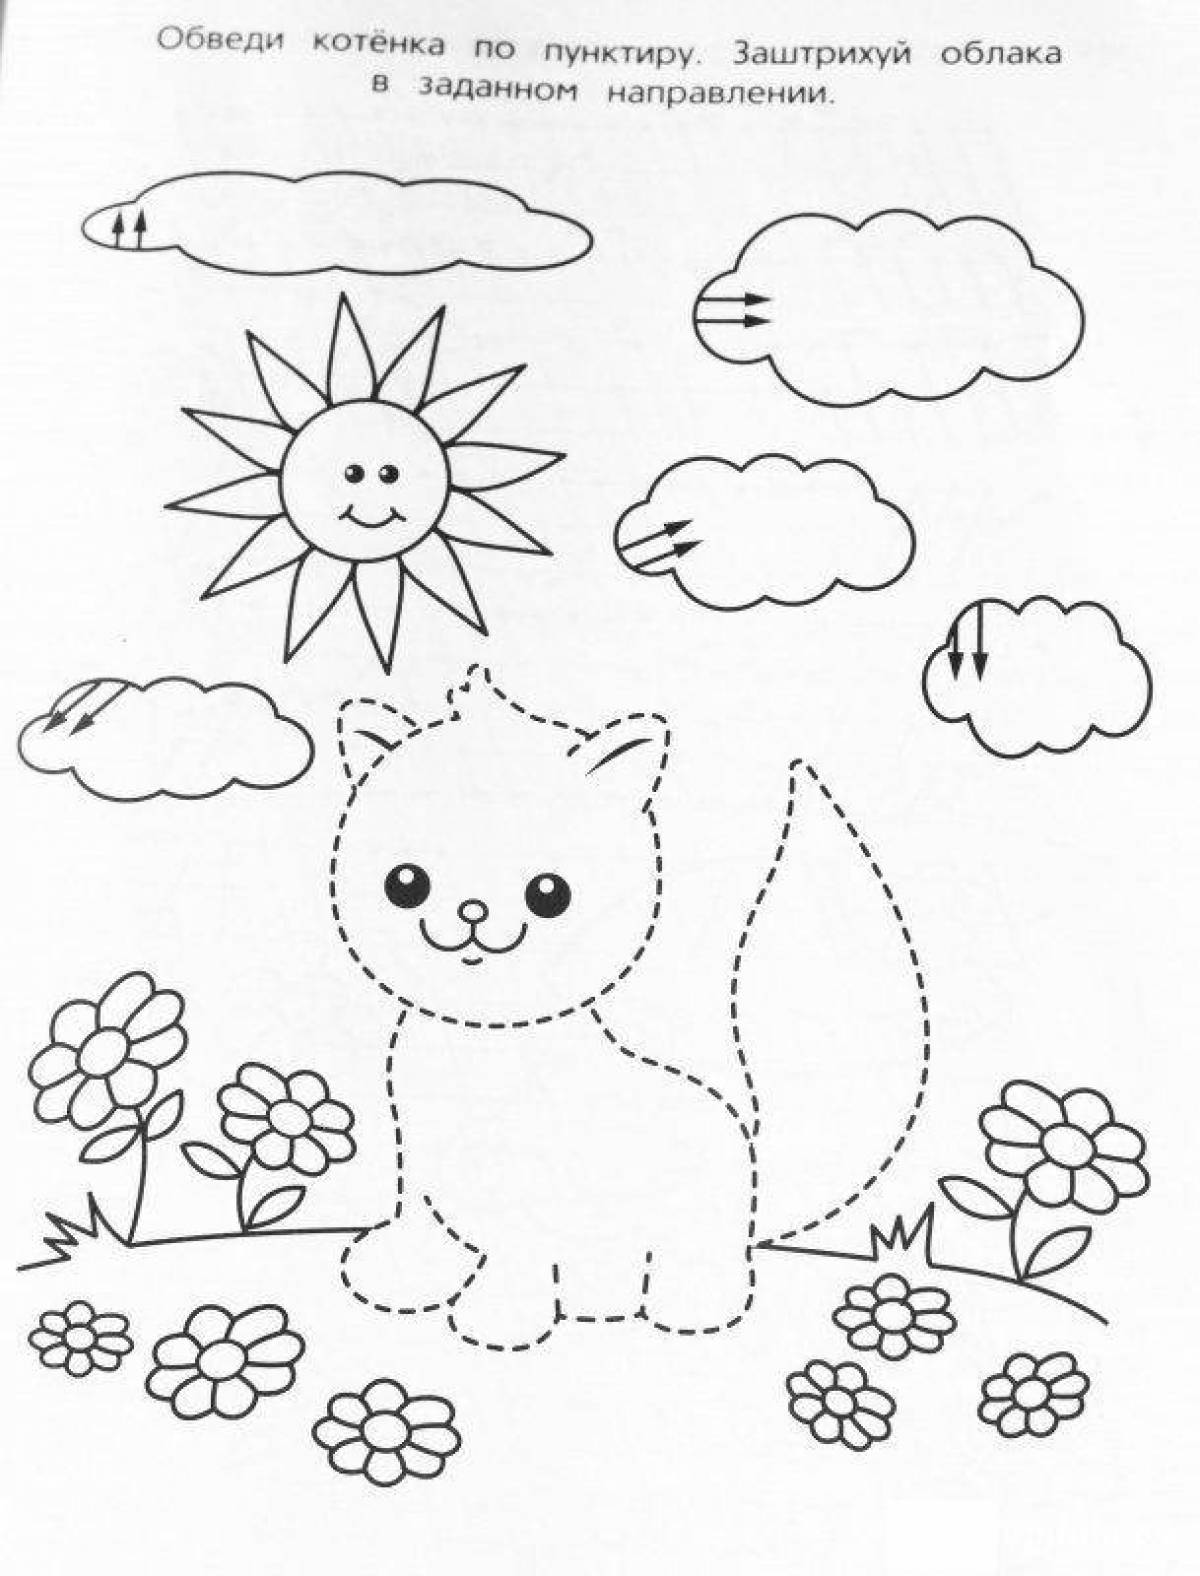 Developing coloring book for children 4-5 years old